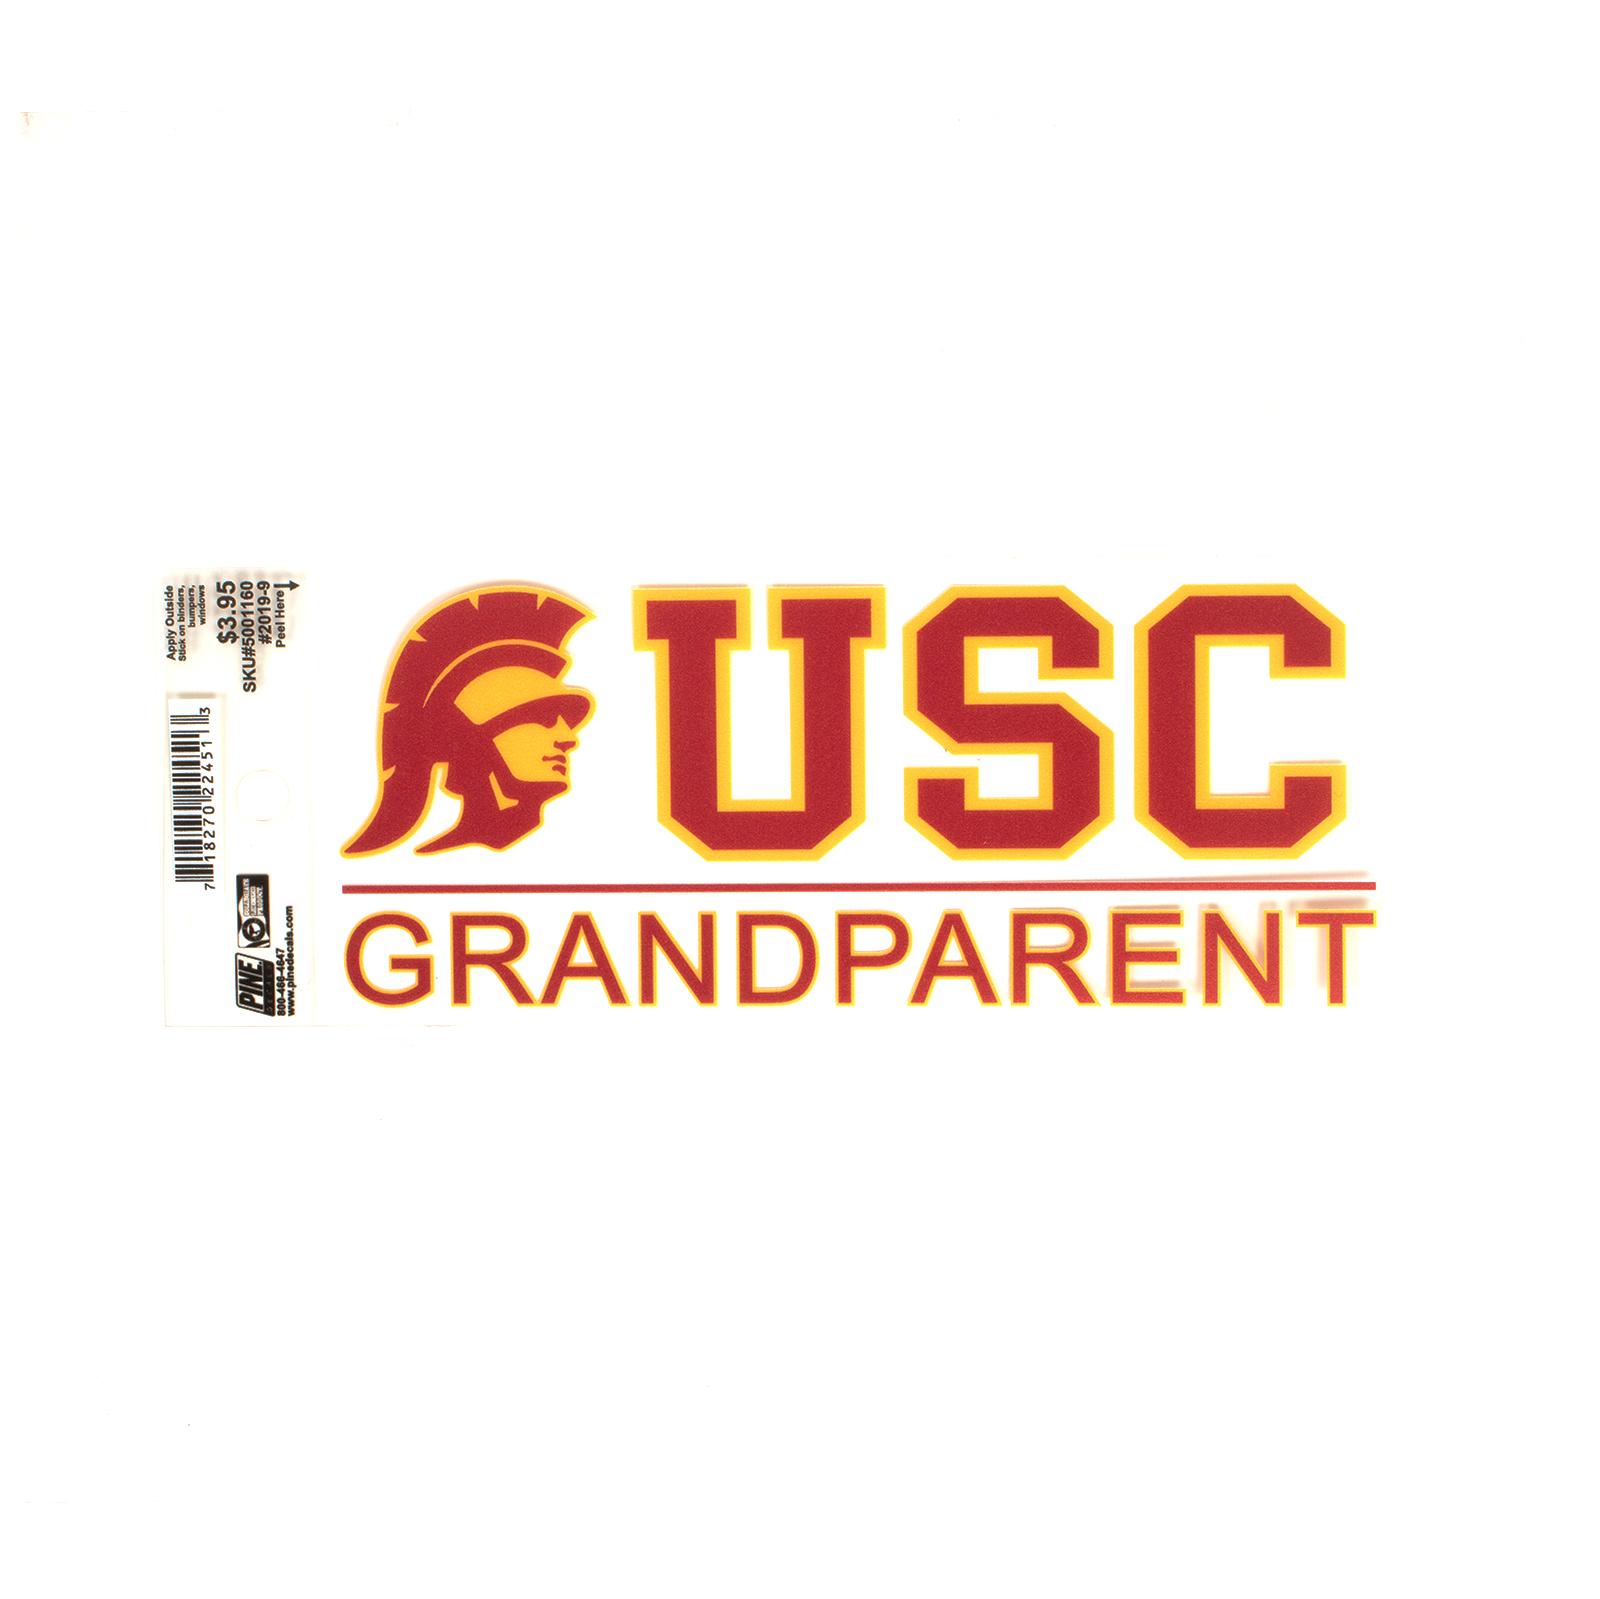 USC Tommy Grandparent Inside Decal 3" X 8" image01